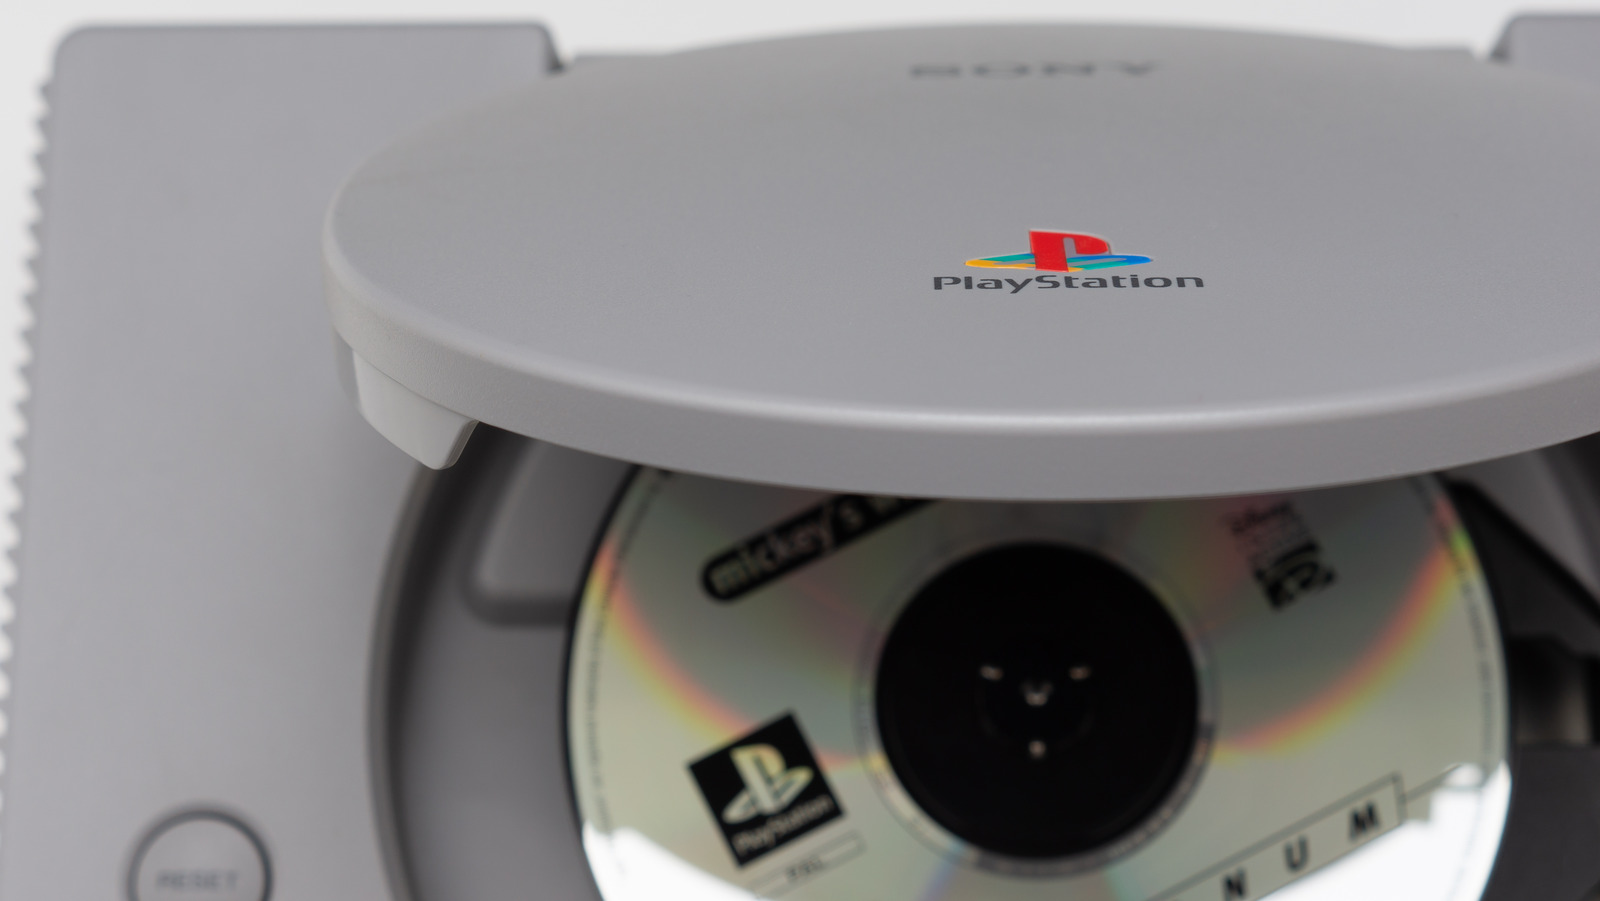 There Are Only 3 Near-Perfect PS1 Games, According to Metacritic